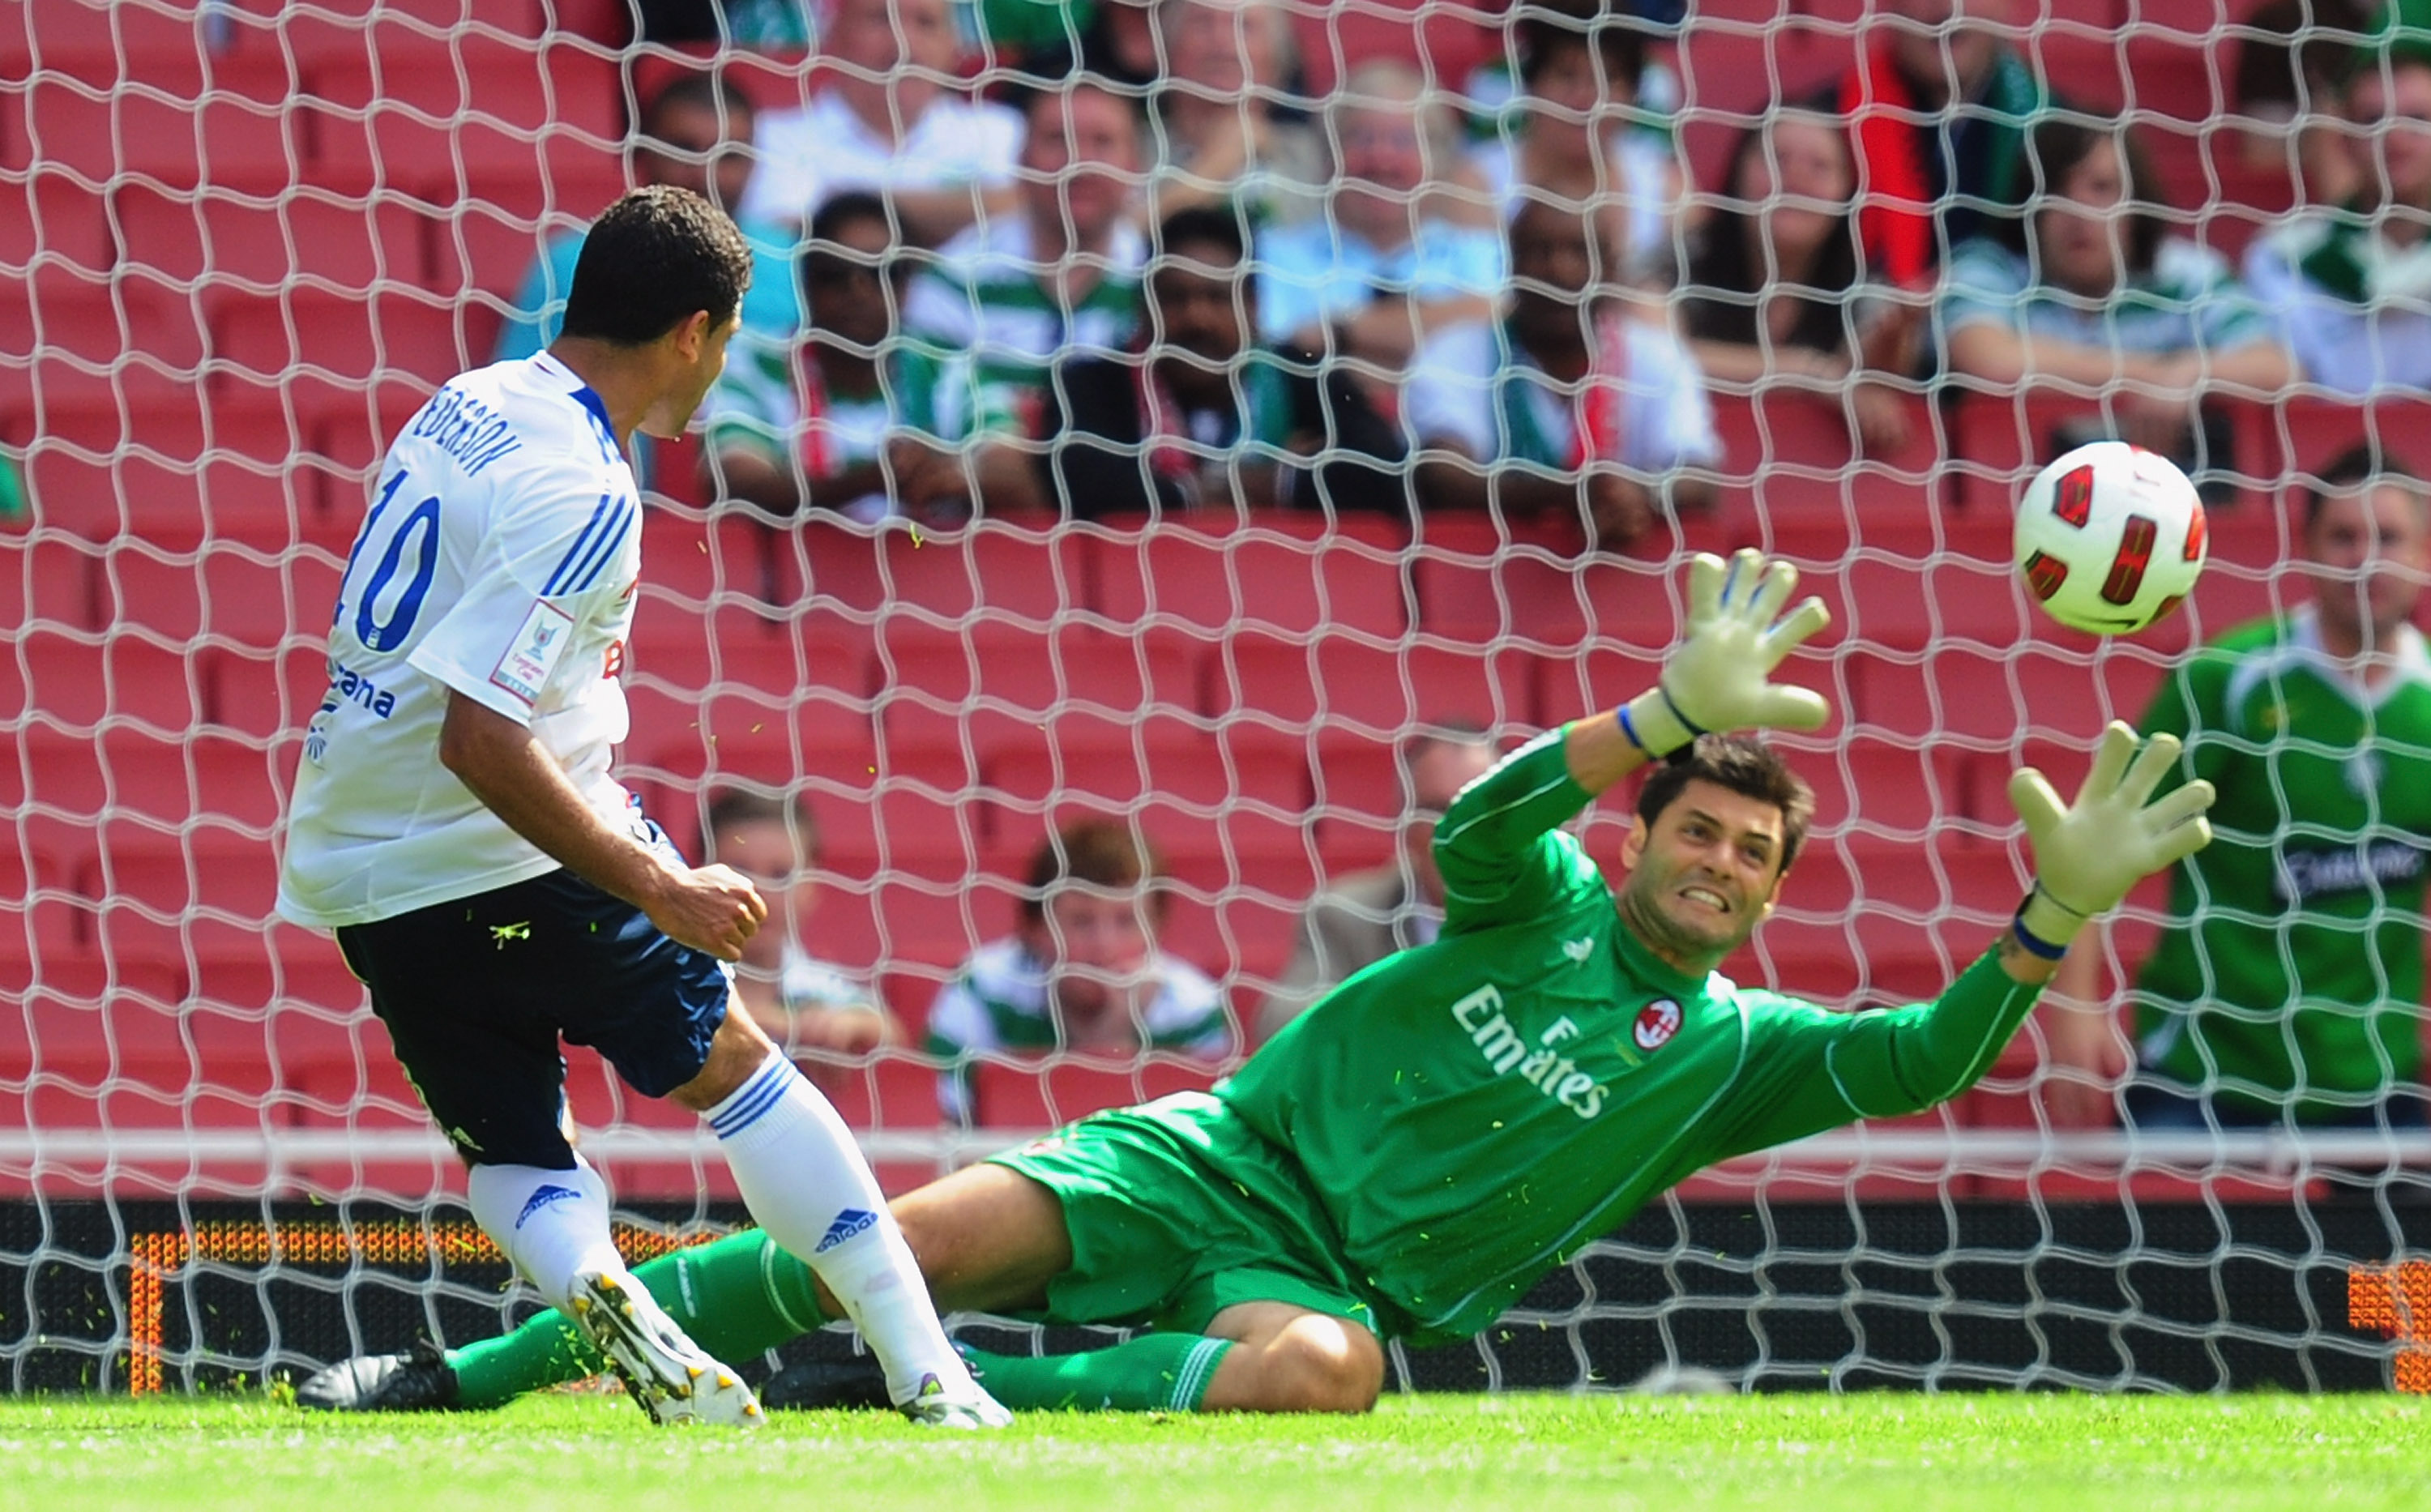 LONDON, ENGLAND - AUGUST 01:  Ederson of Lyon hits the bar as Marco Amelia of AC Milan dives during the Emirates Cup match between AC Milan and Lyon at Emirates Stadium on August 1, 2010 in London, England.  (Photo by Mike Hewitt/Getty Images)